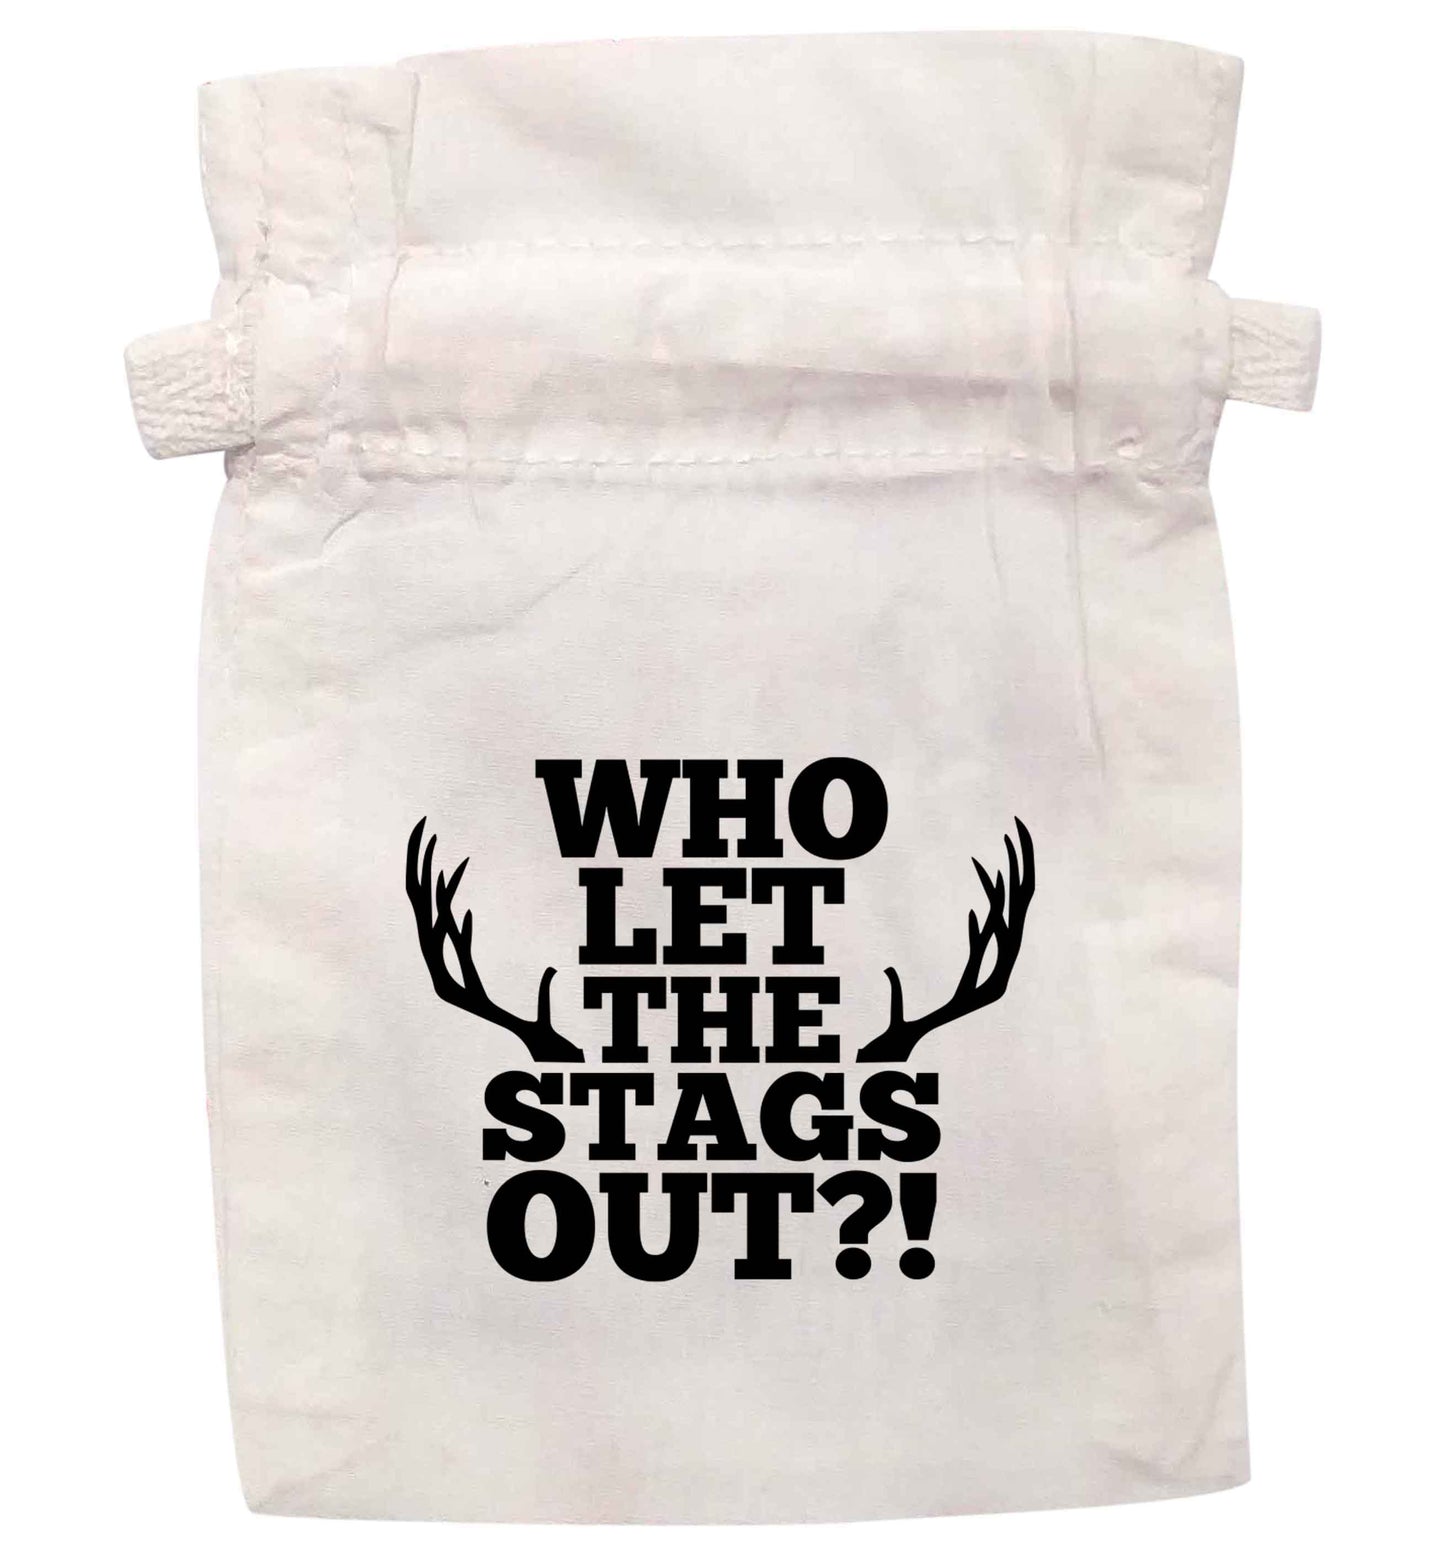 Who let the stags out | XS - L | Pouch / Drawstring bag / Sack | Organic Cotton | Bulk discounts available!